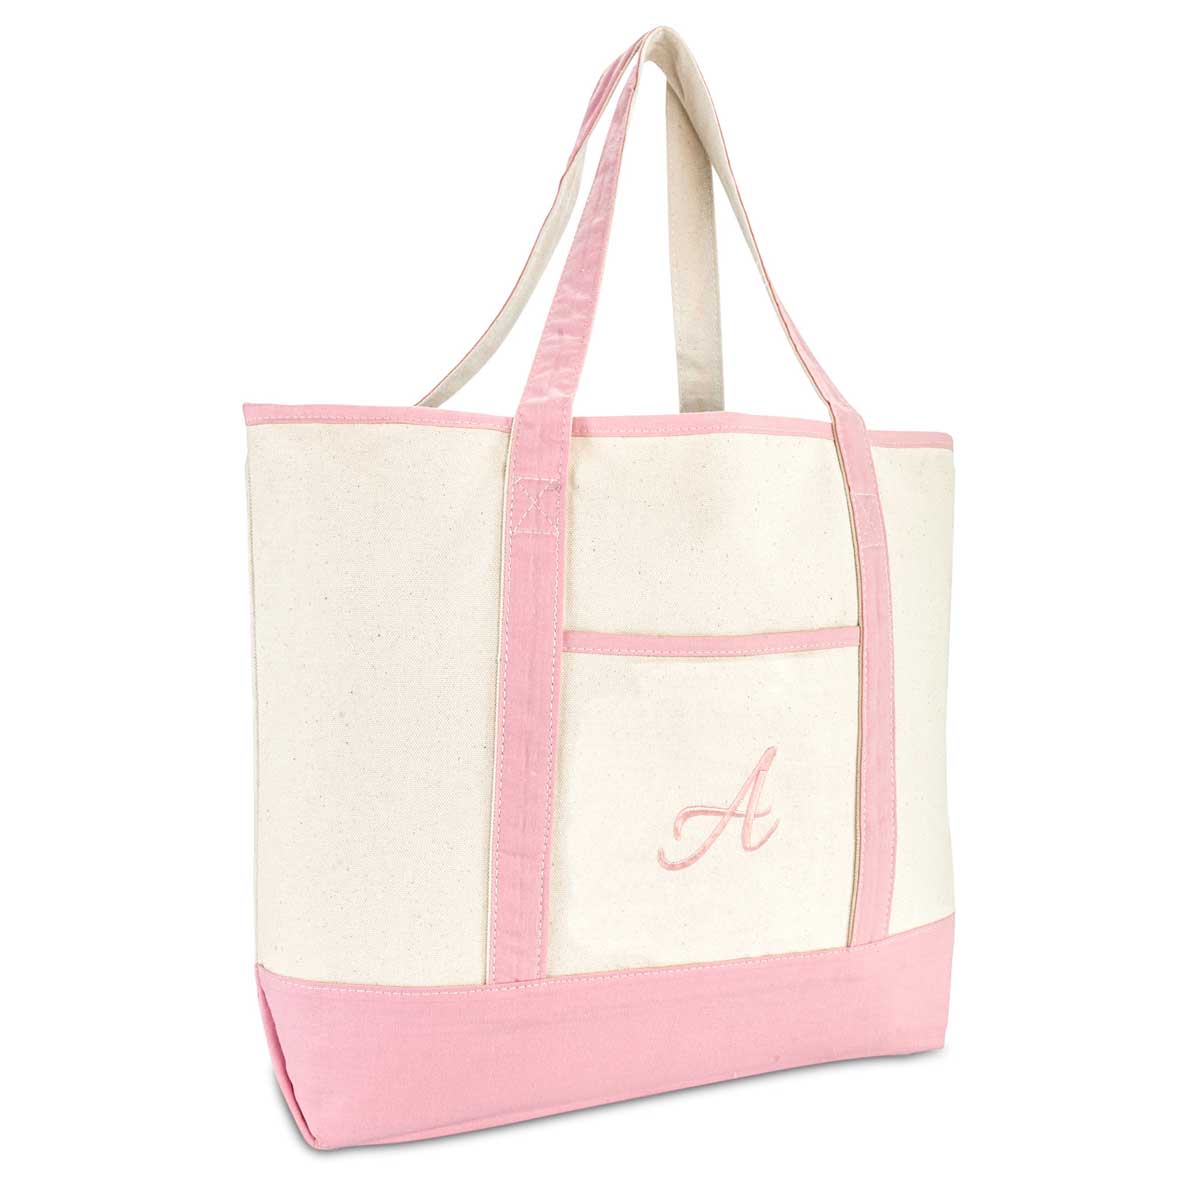 CUSTOM HEAVY CANVAS ZIPPERED SHOPPING TOTE BAGS